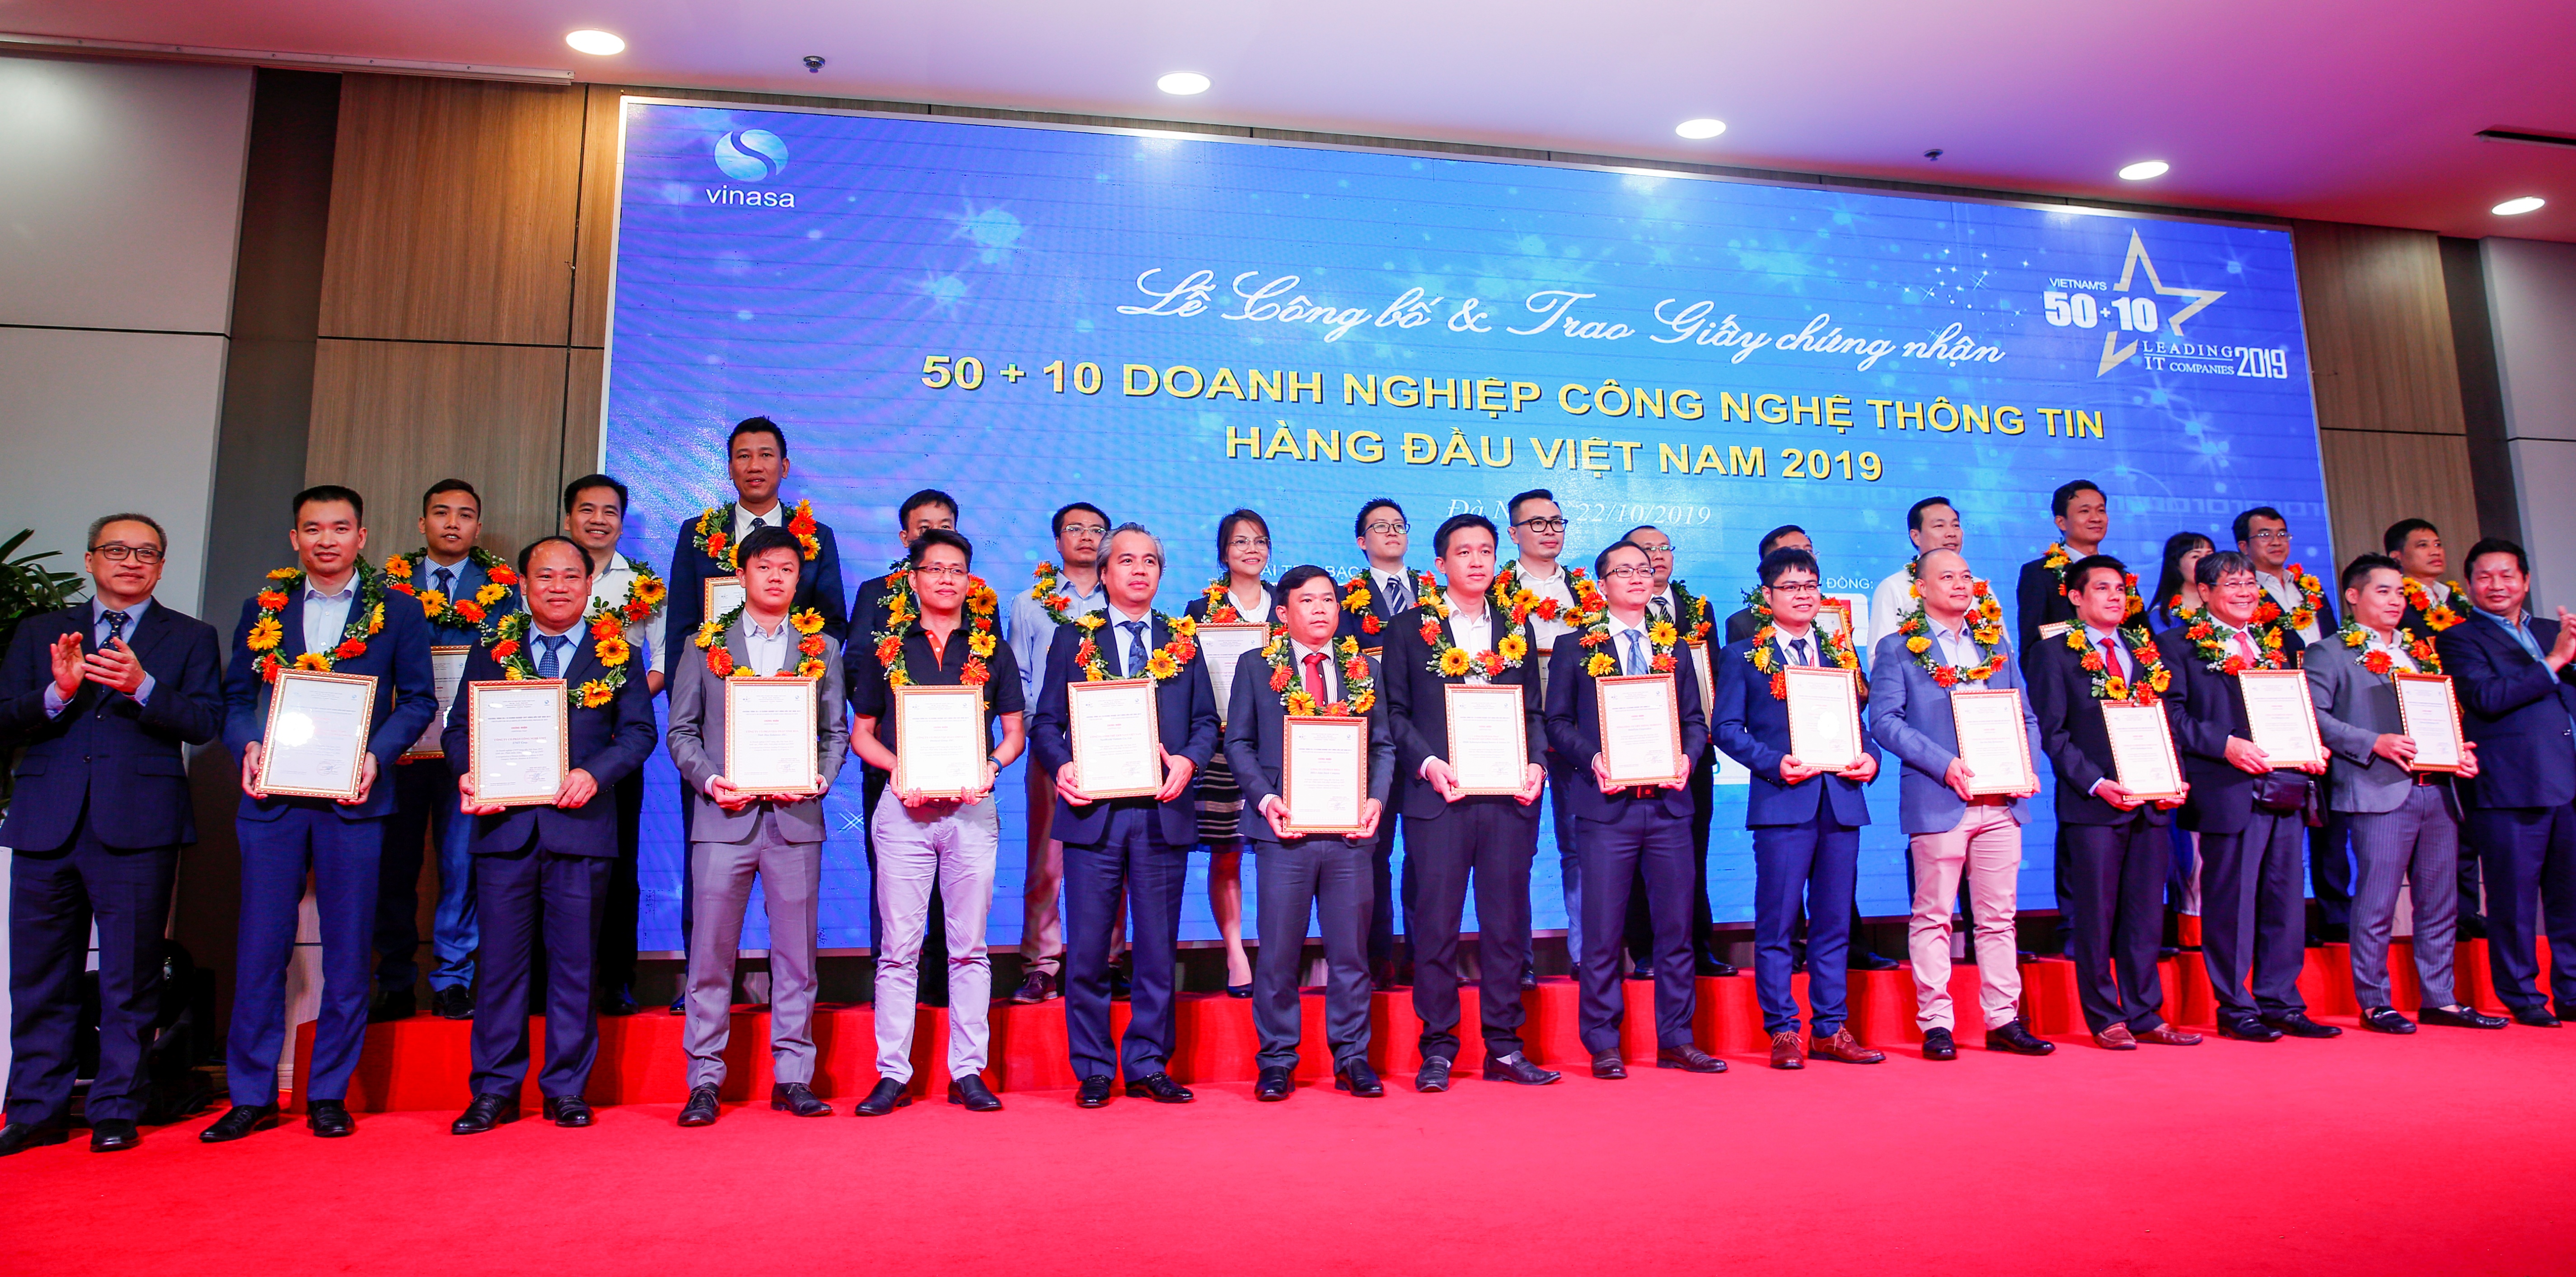 CMC awarded Top 50 IT enterprises in Vietnam and Enterprise with outstanding 4.0 products